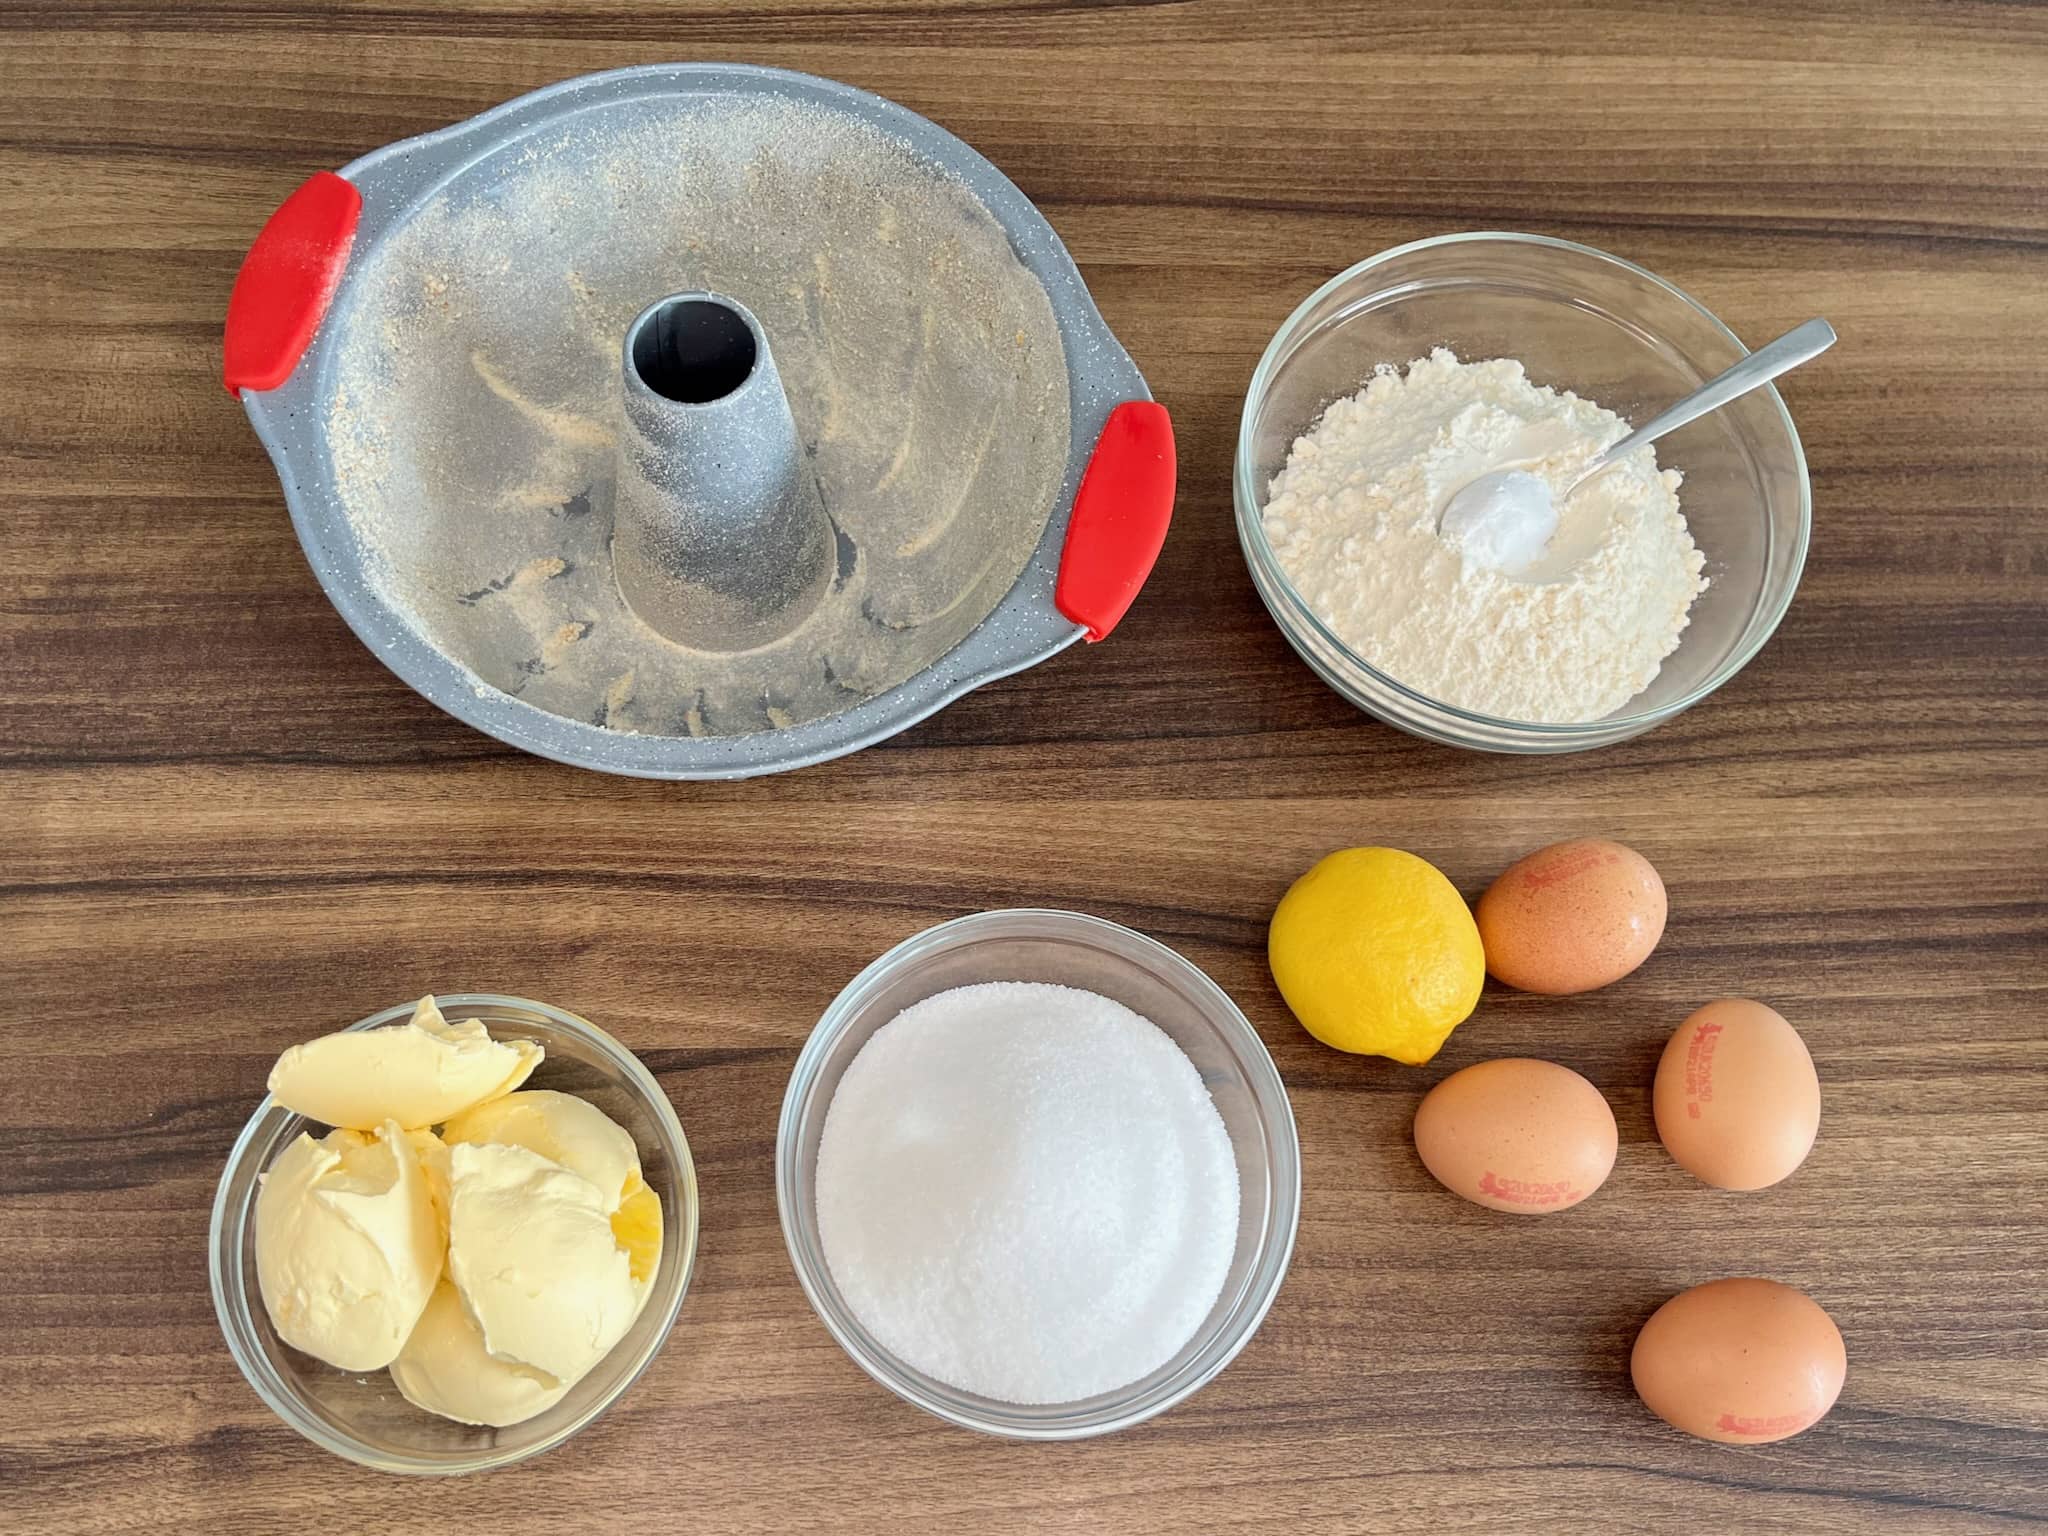 All the ingredients on the tabletop ready to make Easter Bundt Cake